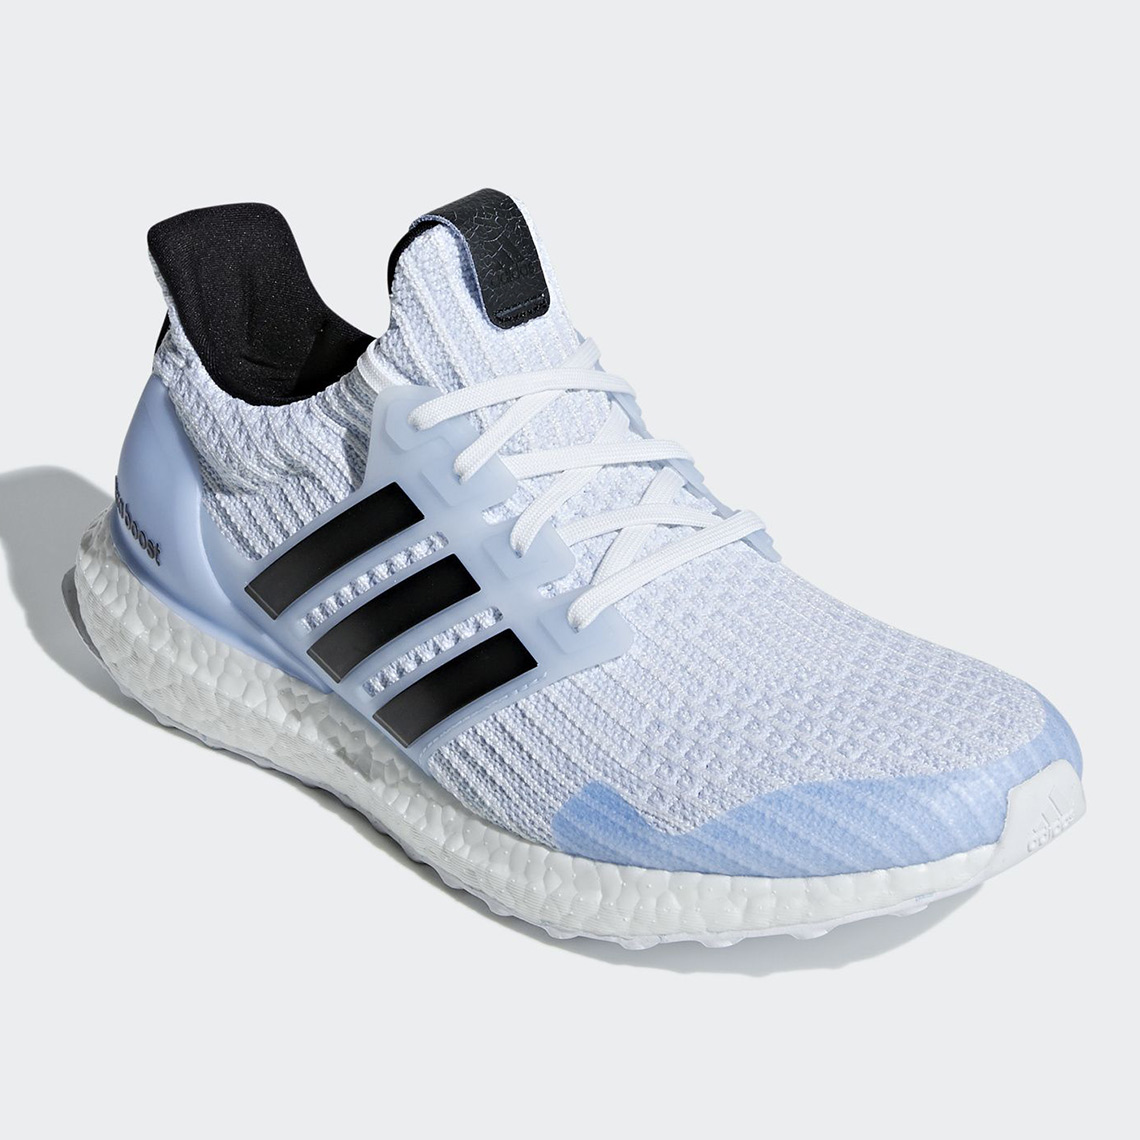 adidas ultra boost mens game of thrones